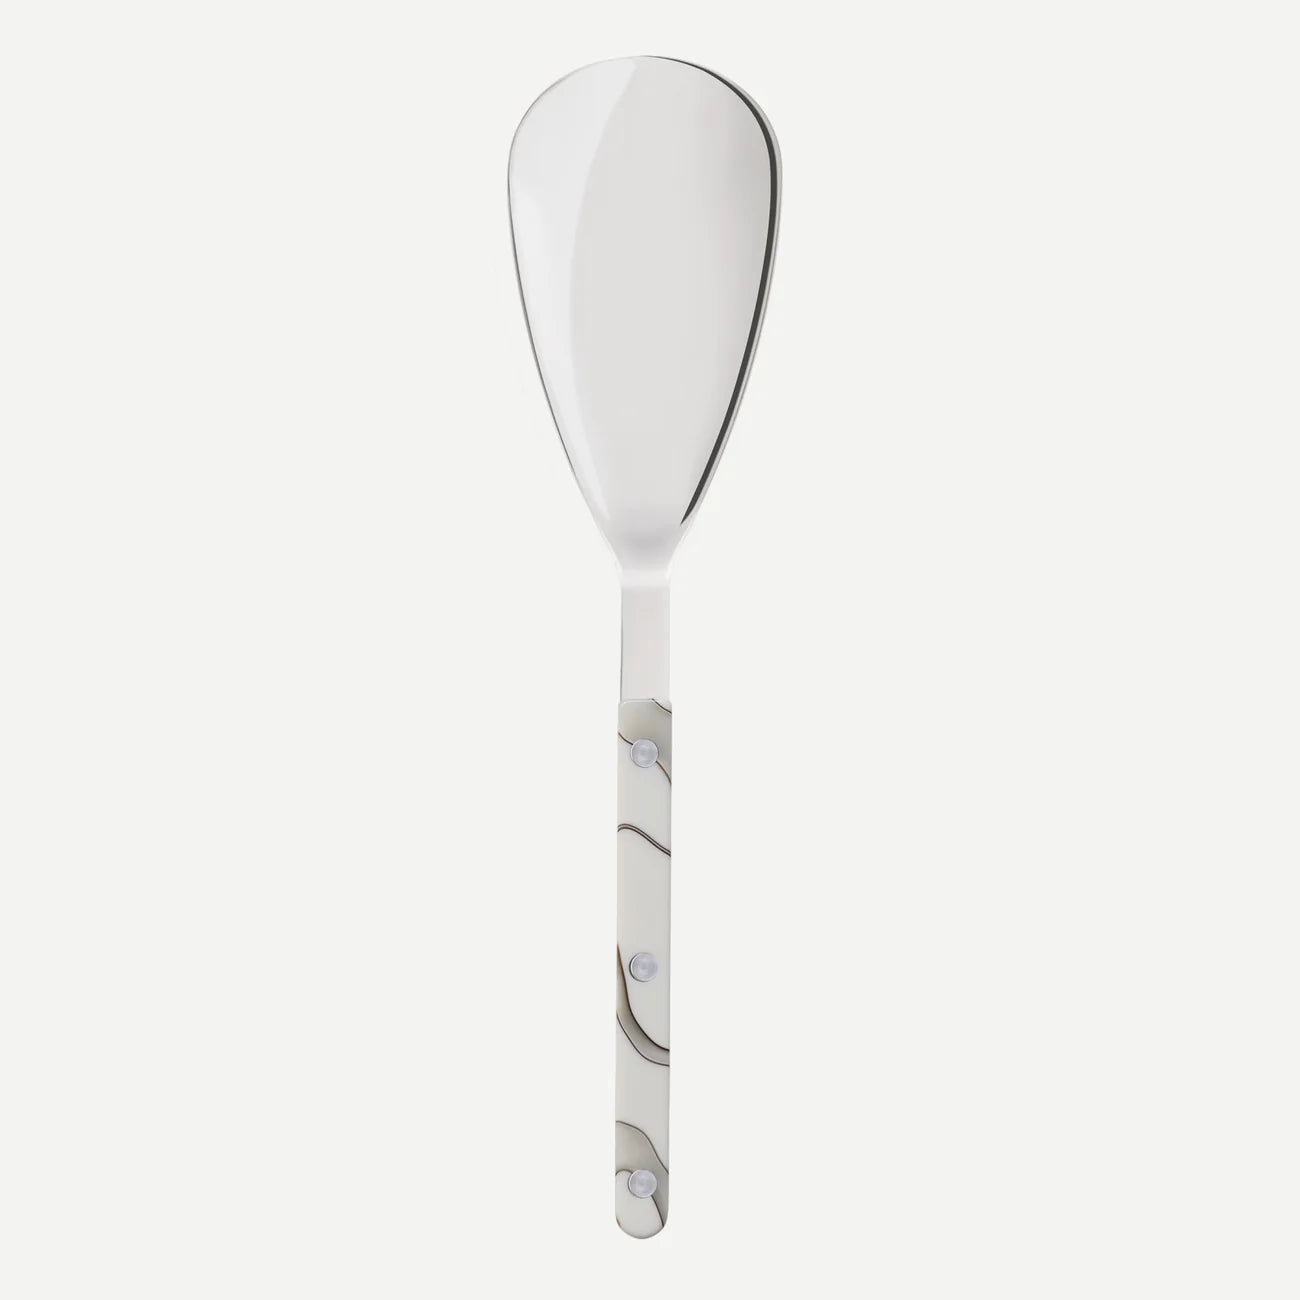 A large silver spoon made by Sabre Paris with a white and grey swirl pattern on the handle. 